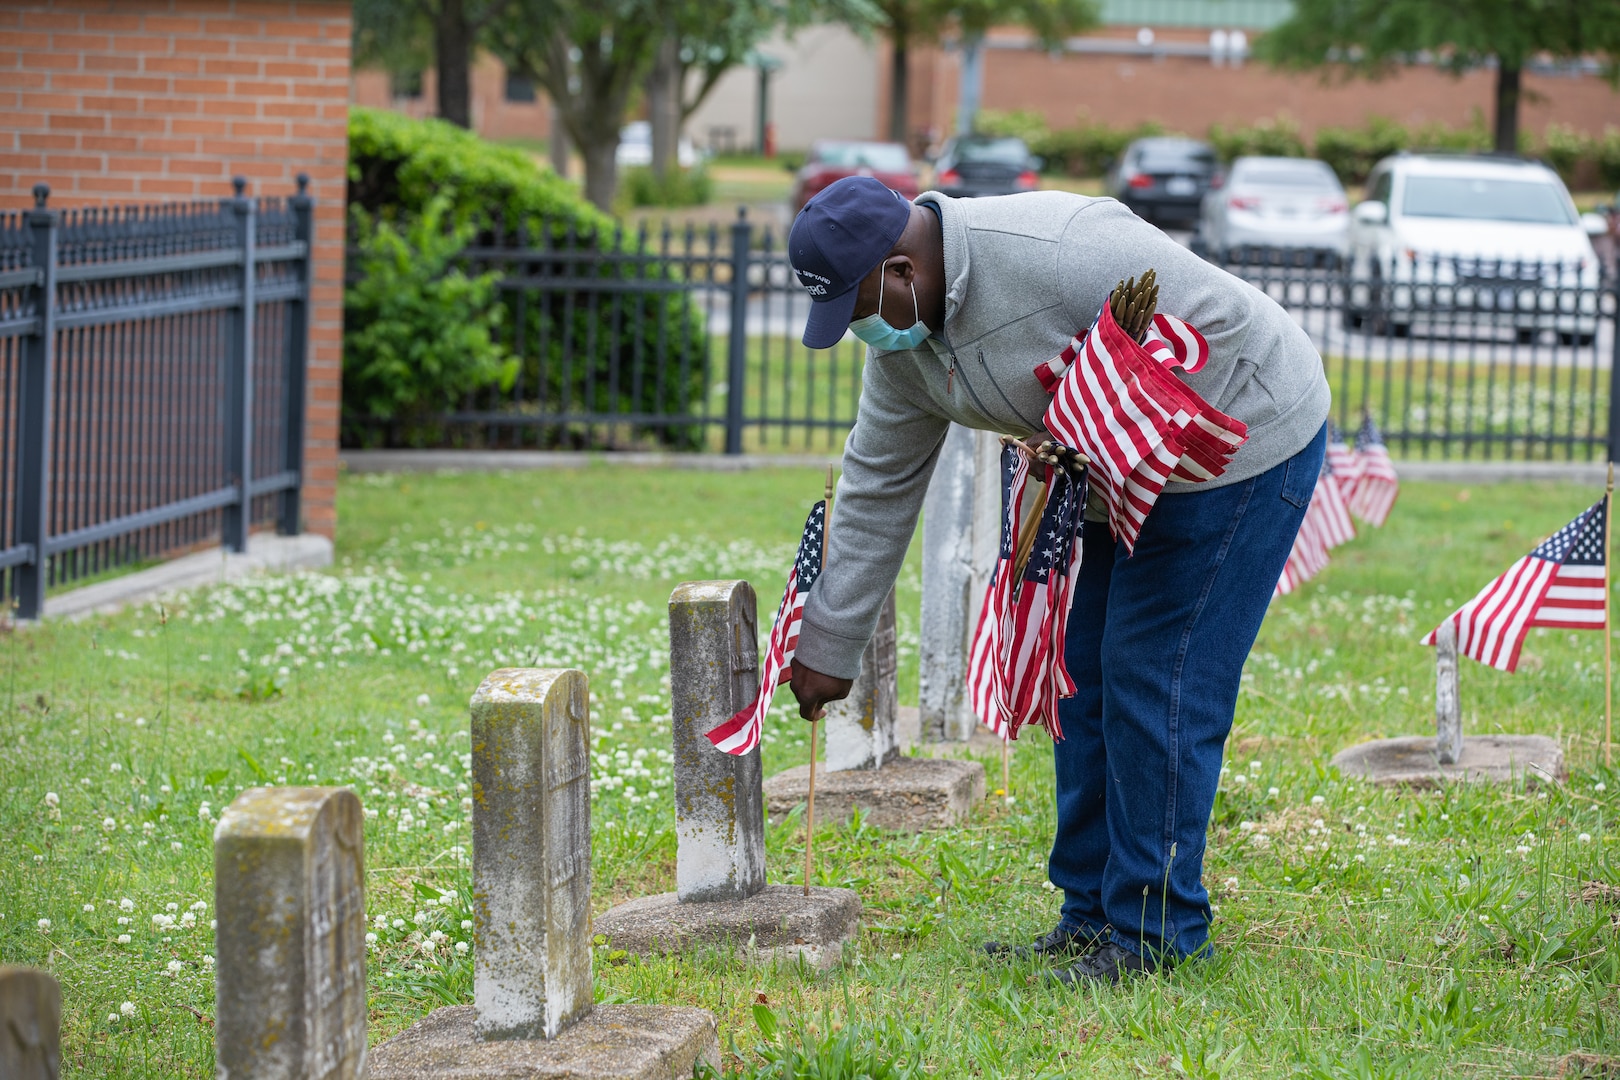 Veteran Employee Readiness Group Member Ricky Burroughs places a flag on the grave of a fallen service member at the Captain Ted Conaway Memorial Naval Cemetery.